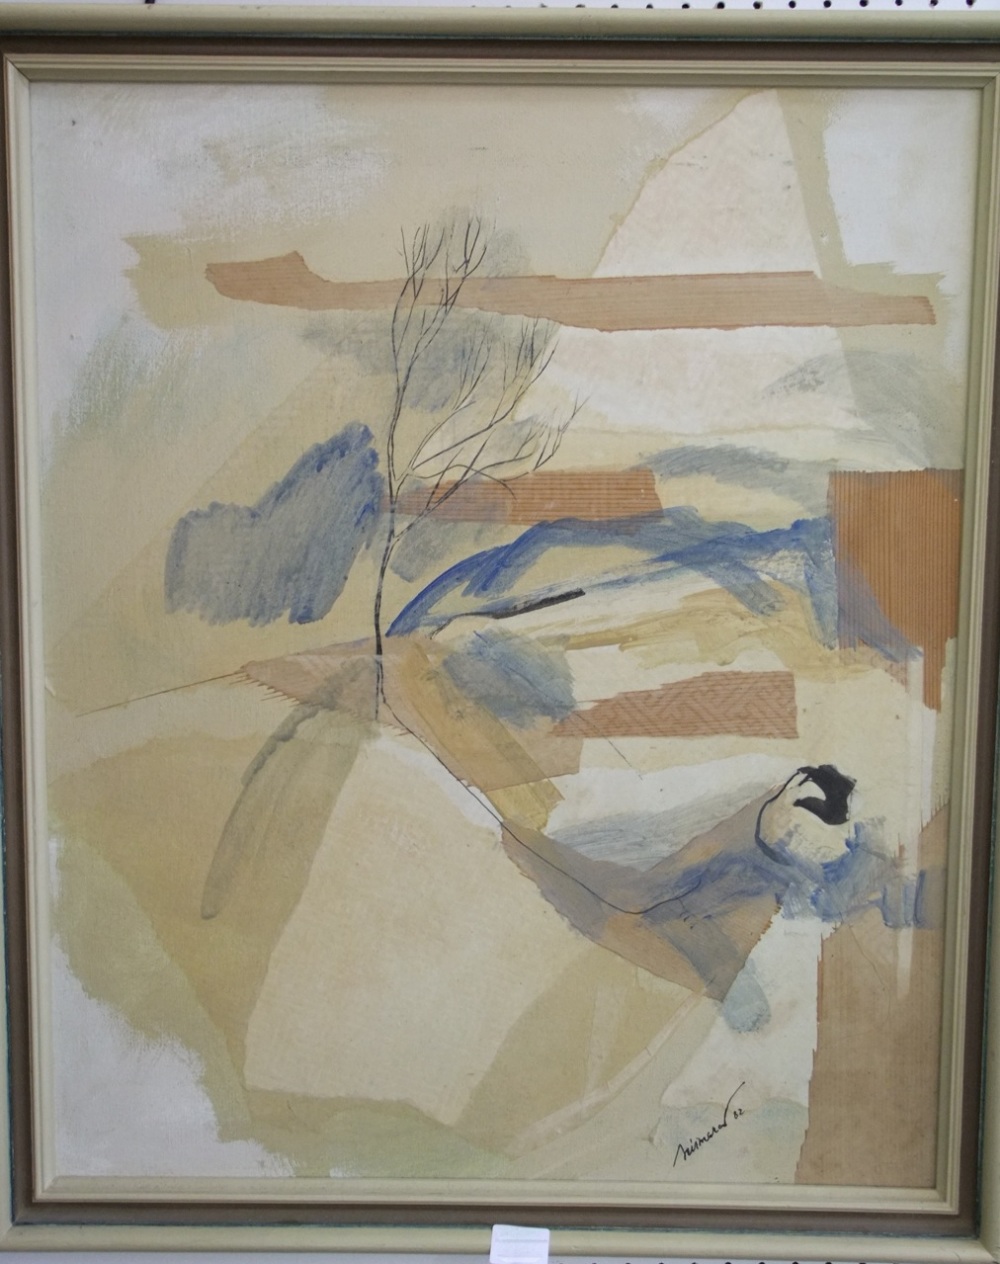 20th century school - Indian Vista, acrylic on canvas, indistinctly signed and dated 82, inscribed